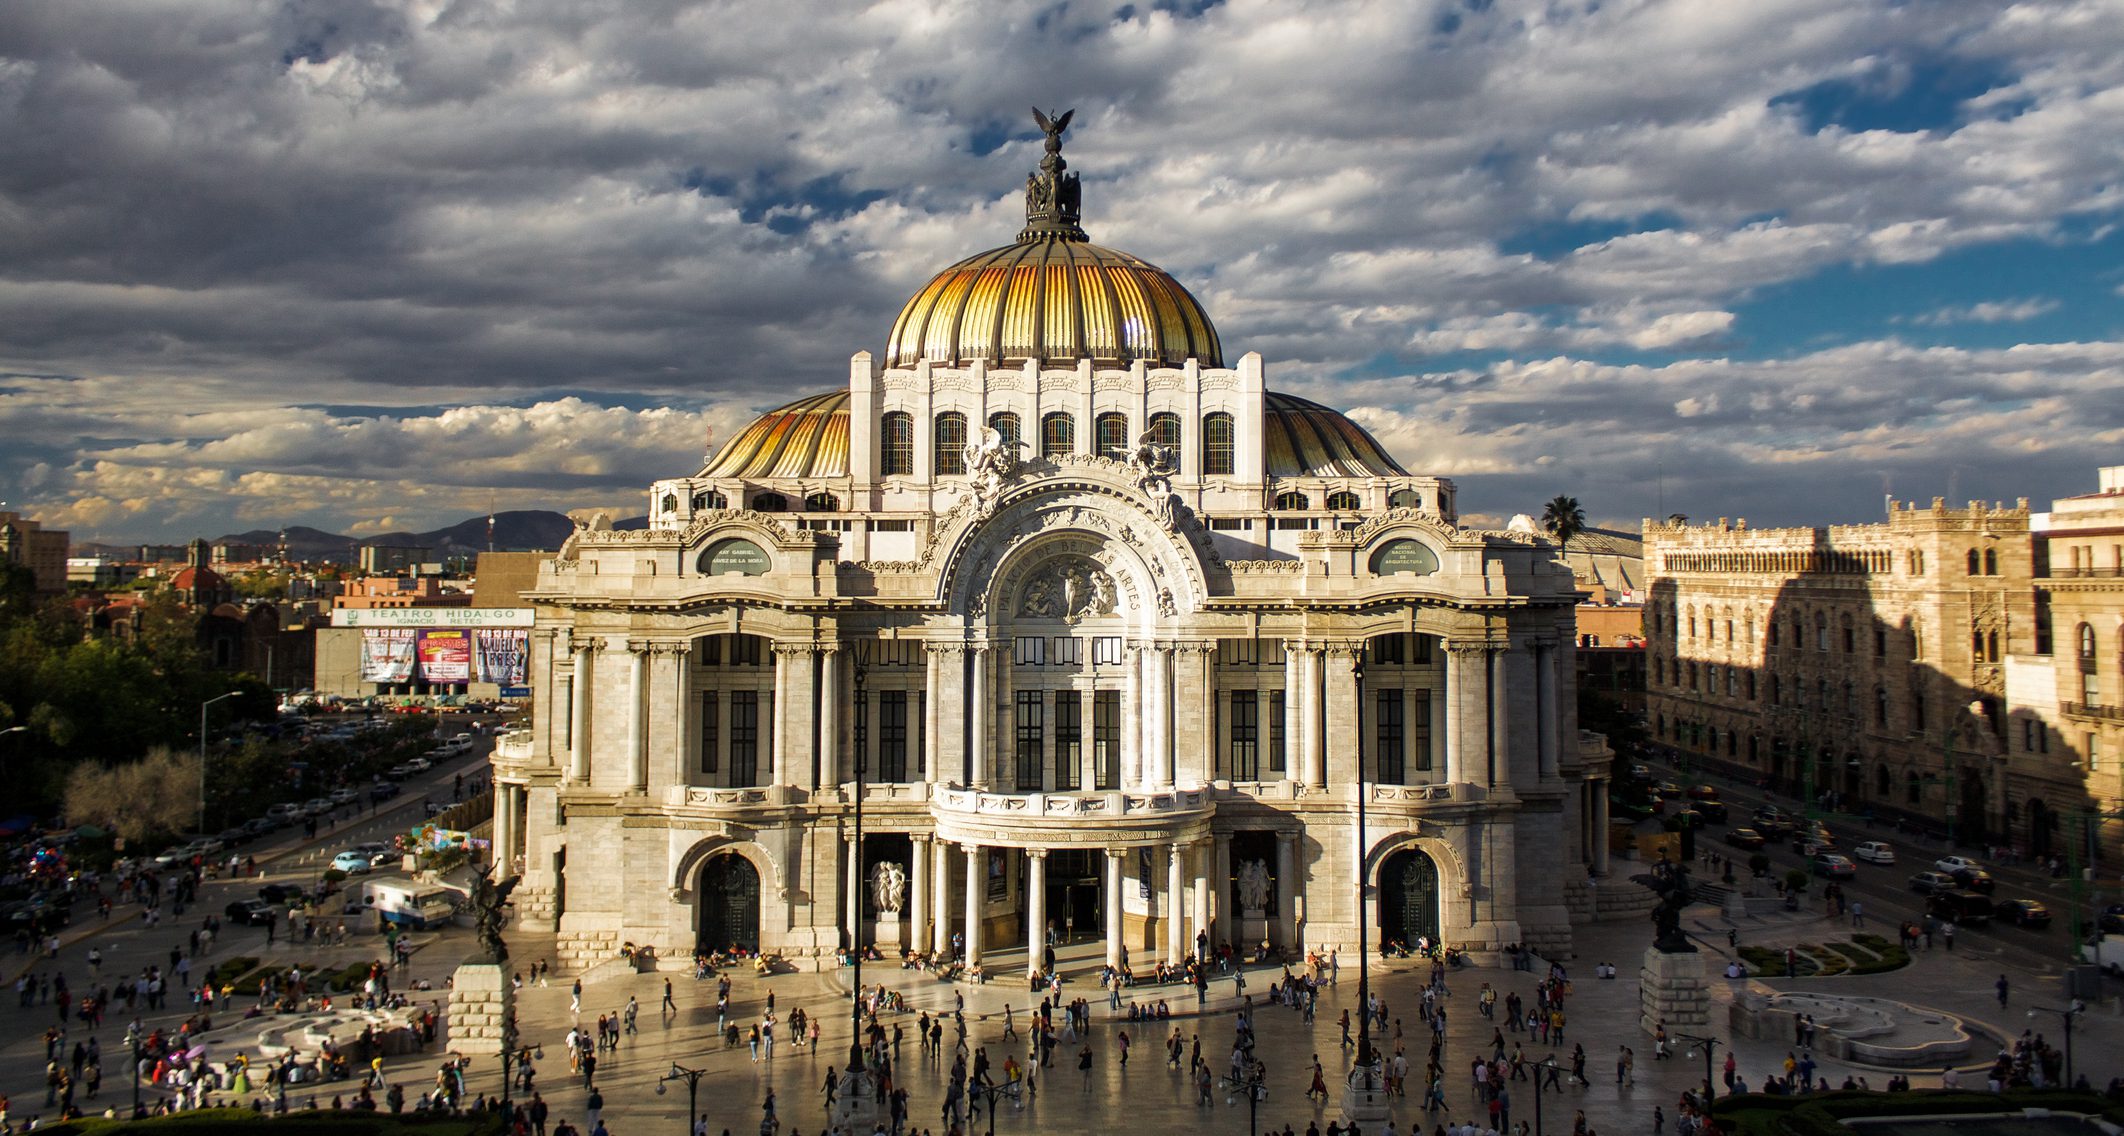 Flights to Mexico City in the $100s to $300s round-trip!